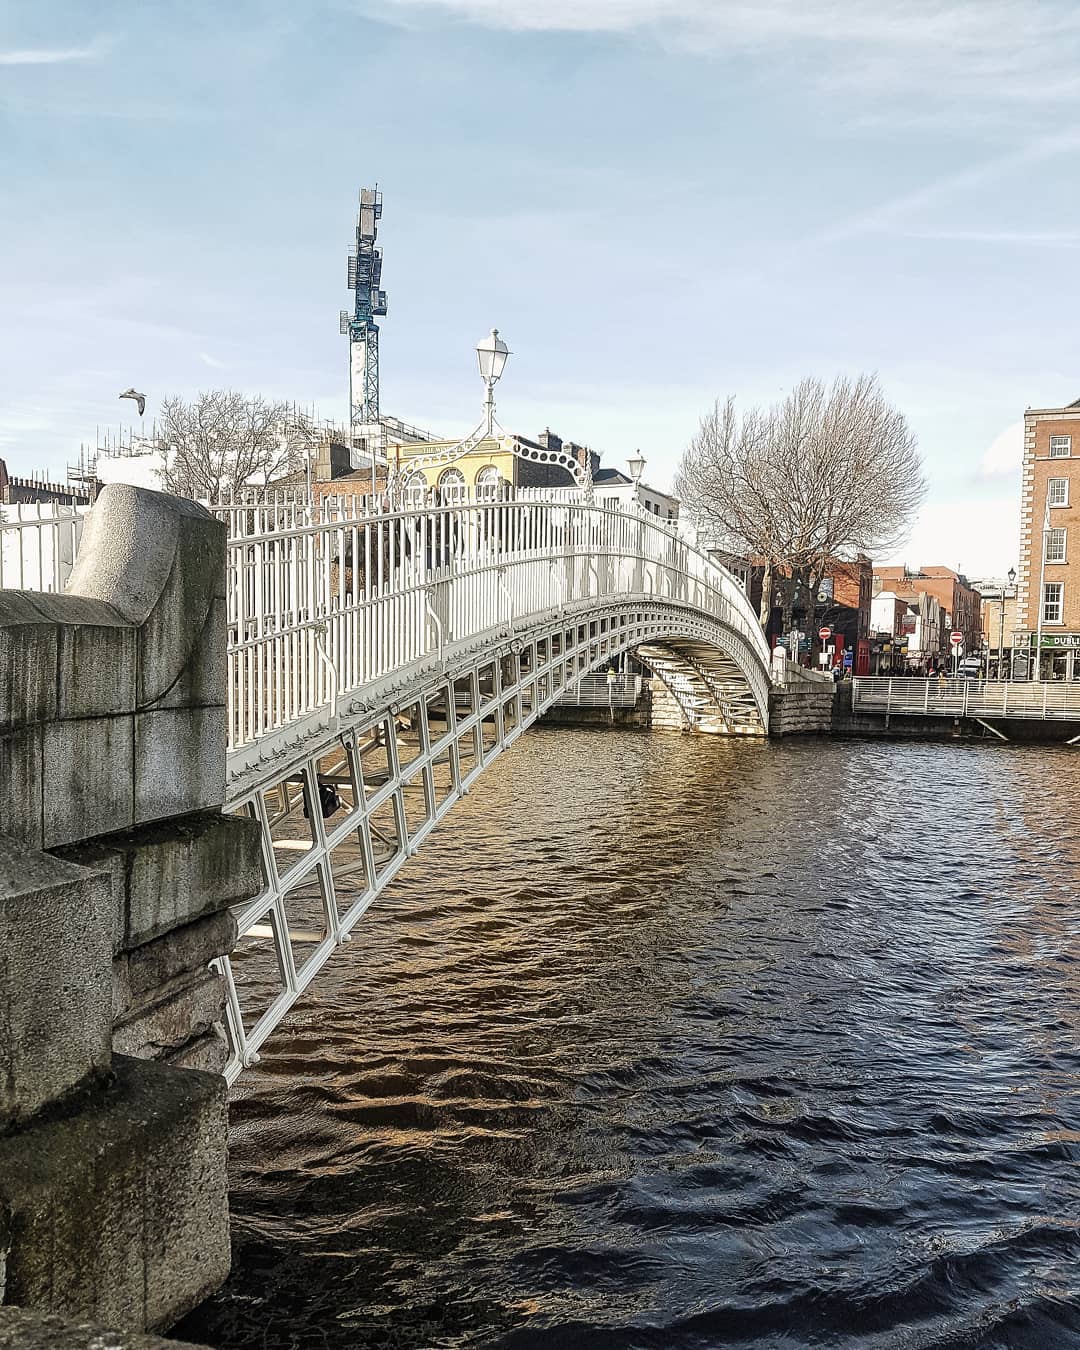 Don't miss the chance to take a photo of the Ha'penny Bridge, Dublin's most photographed landmarks.  